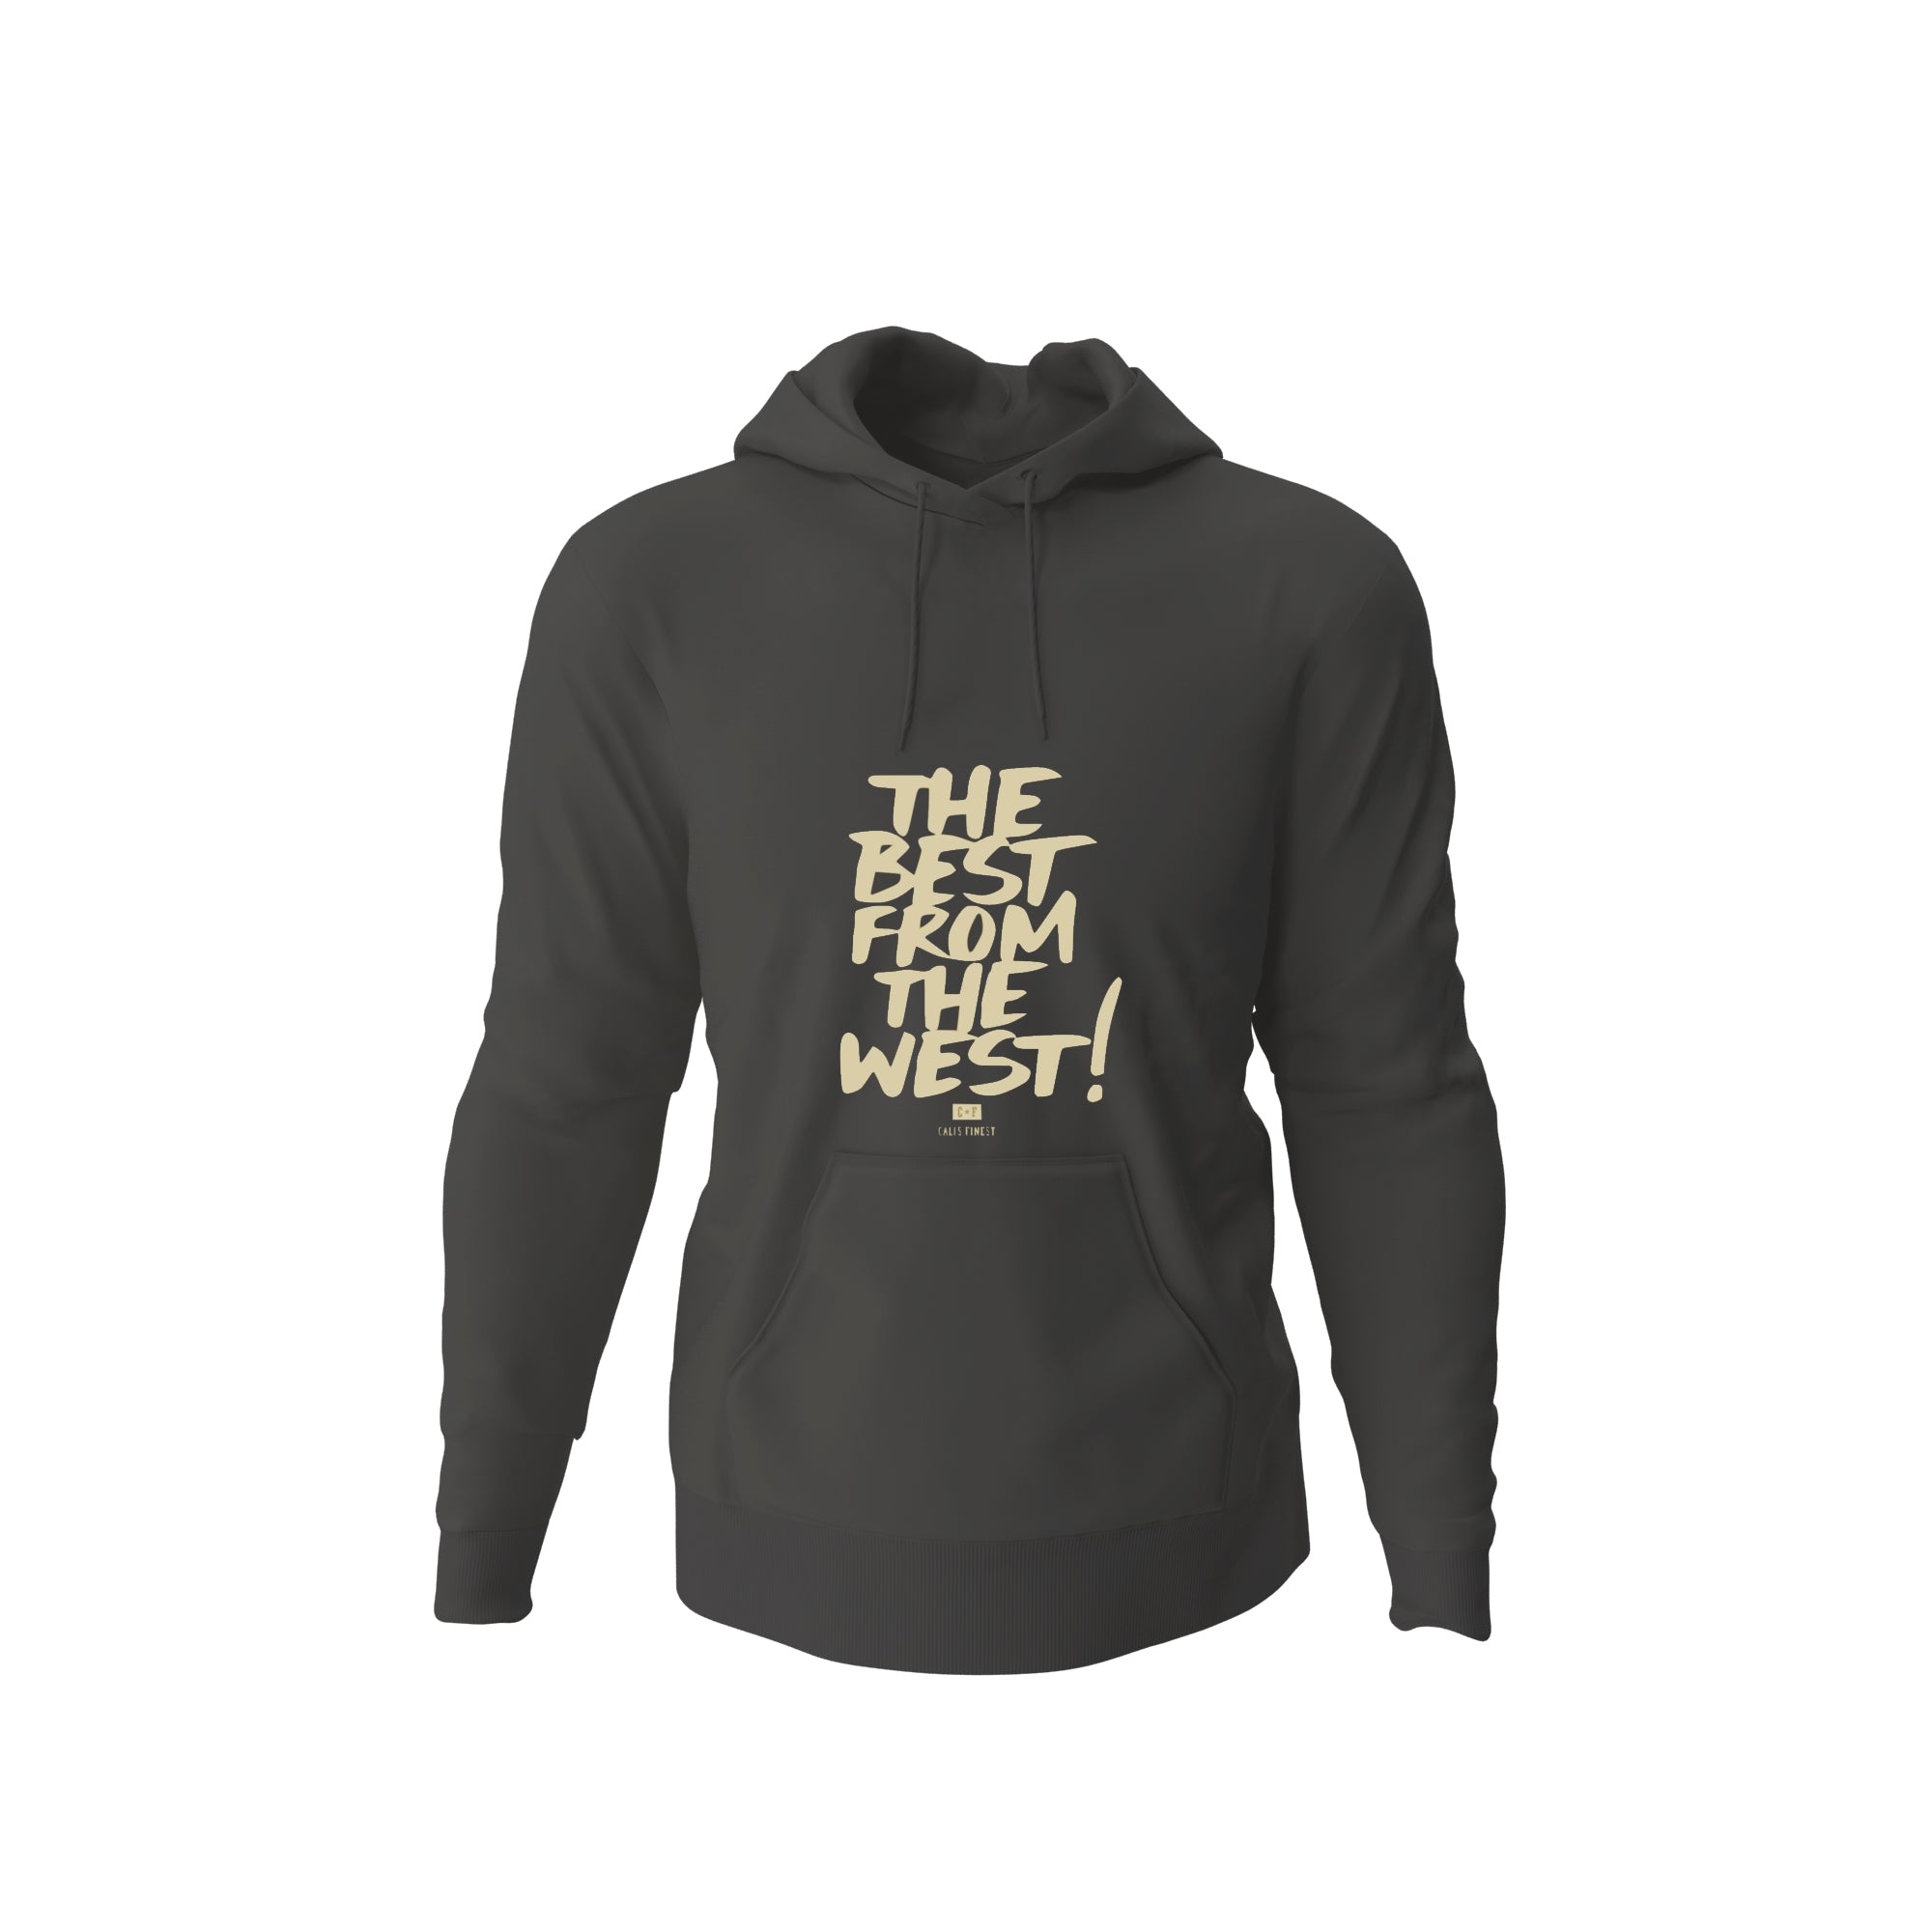 Cali's Finest Tan Best From the West Hoodie